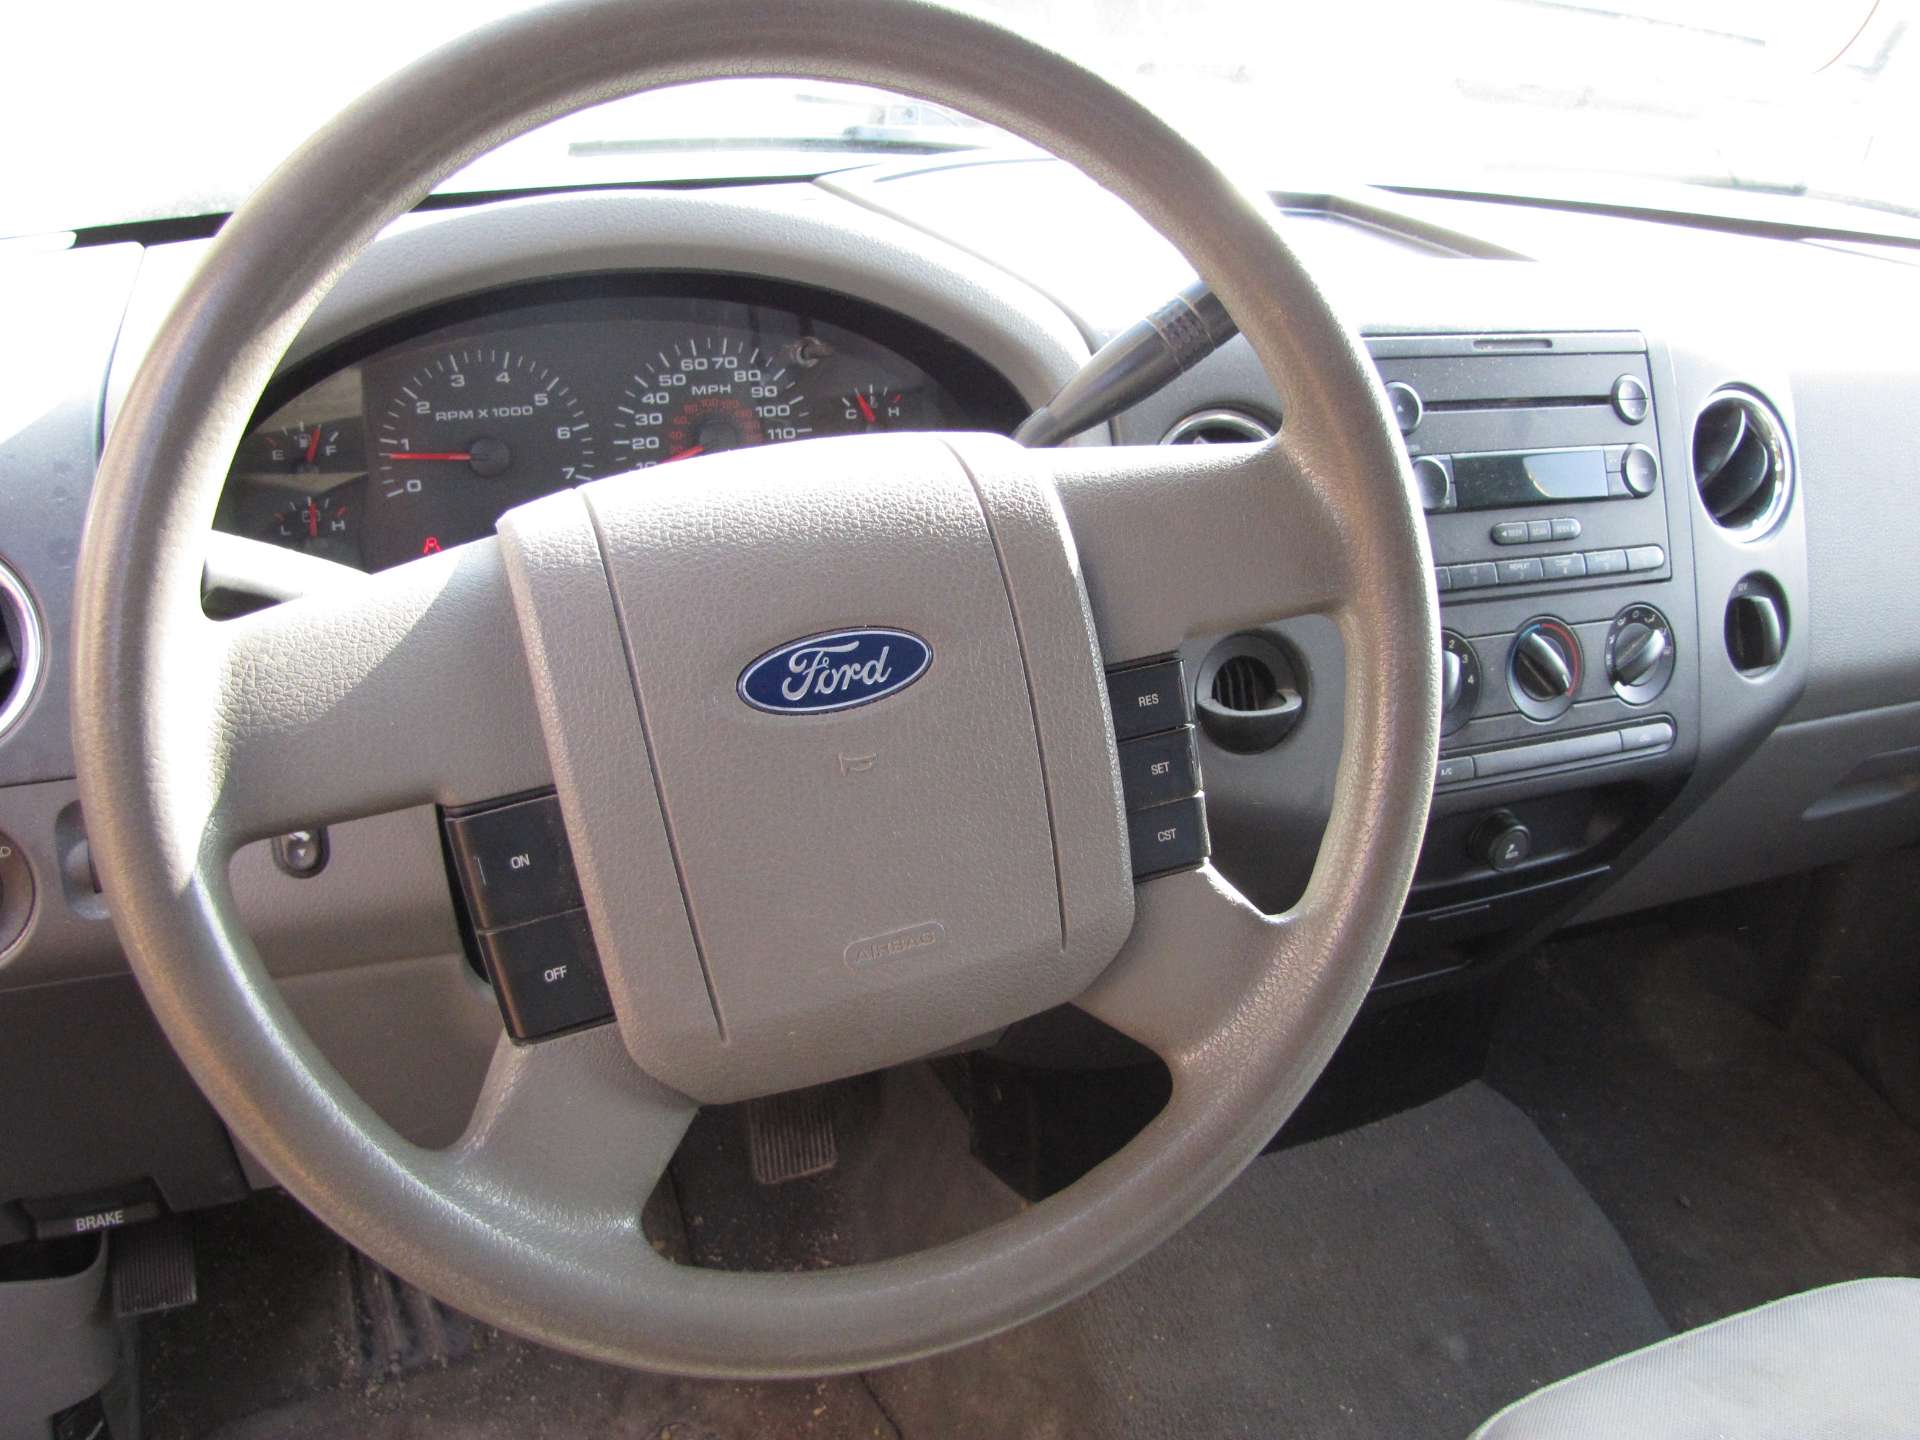 2005 Ford F-150 XLT pickup truck - Image 82 of 89